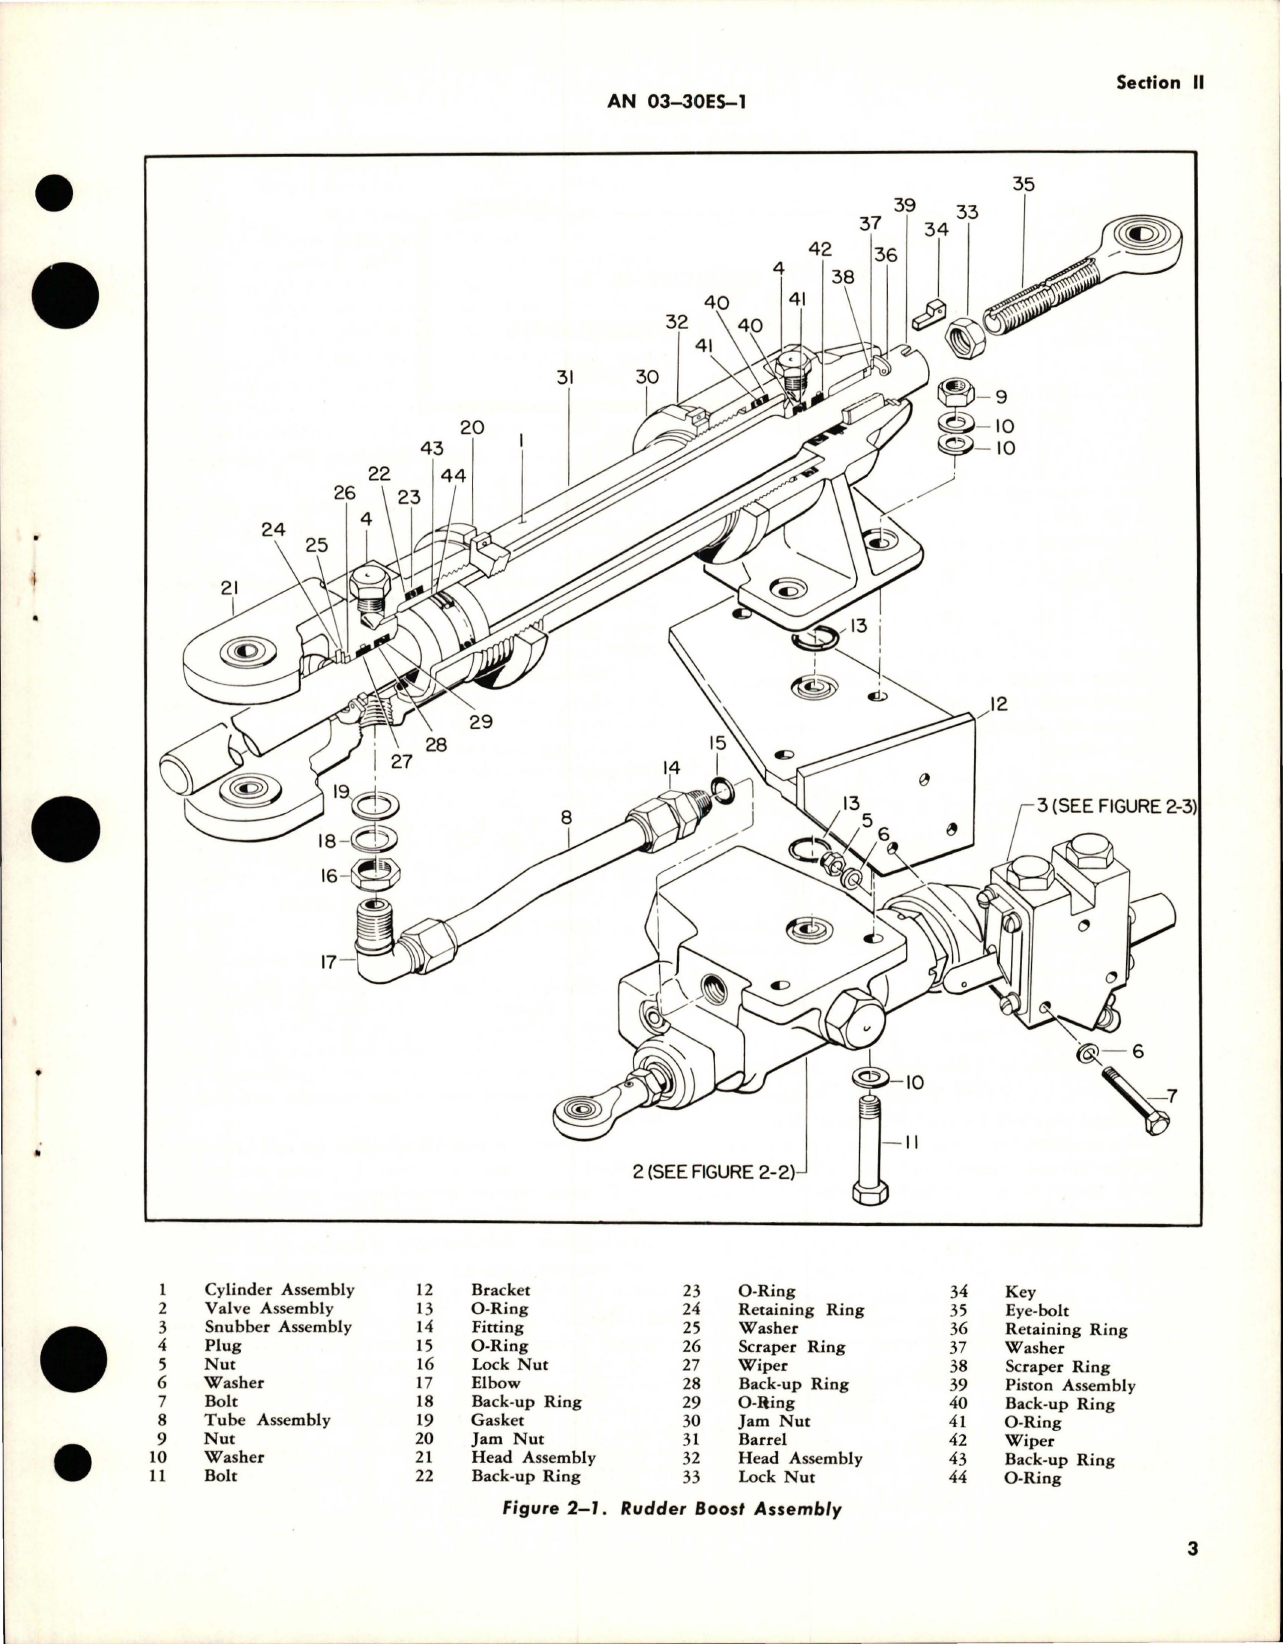 Sample page 5 from AirCorps Library document: Overhaul Instructions for Surface Control Boost Assembly - Parts 40-8047011-89 and 40-8047011-99